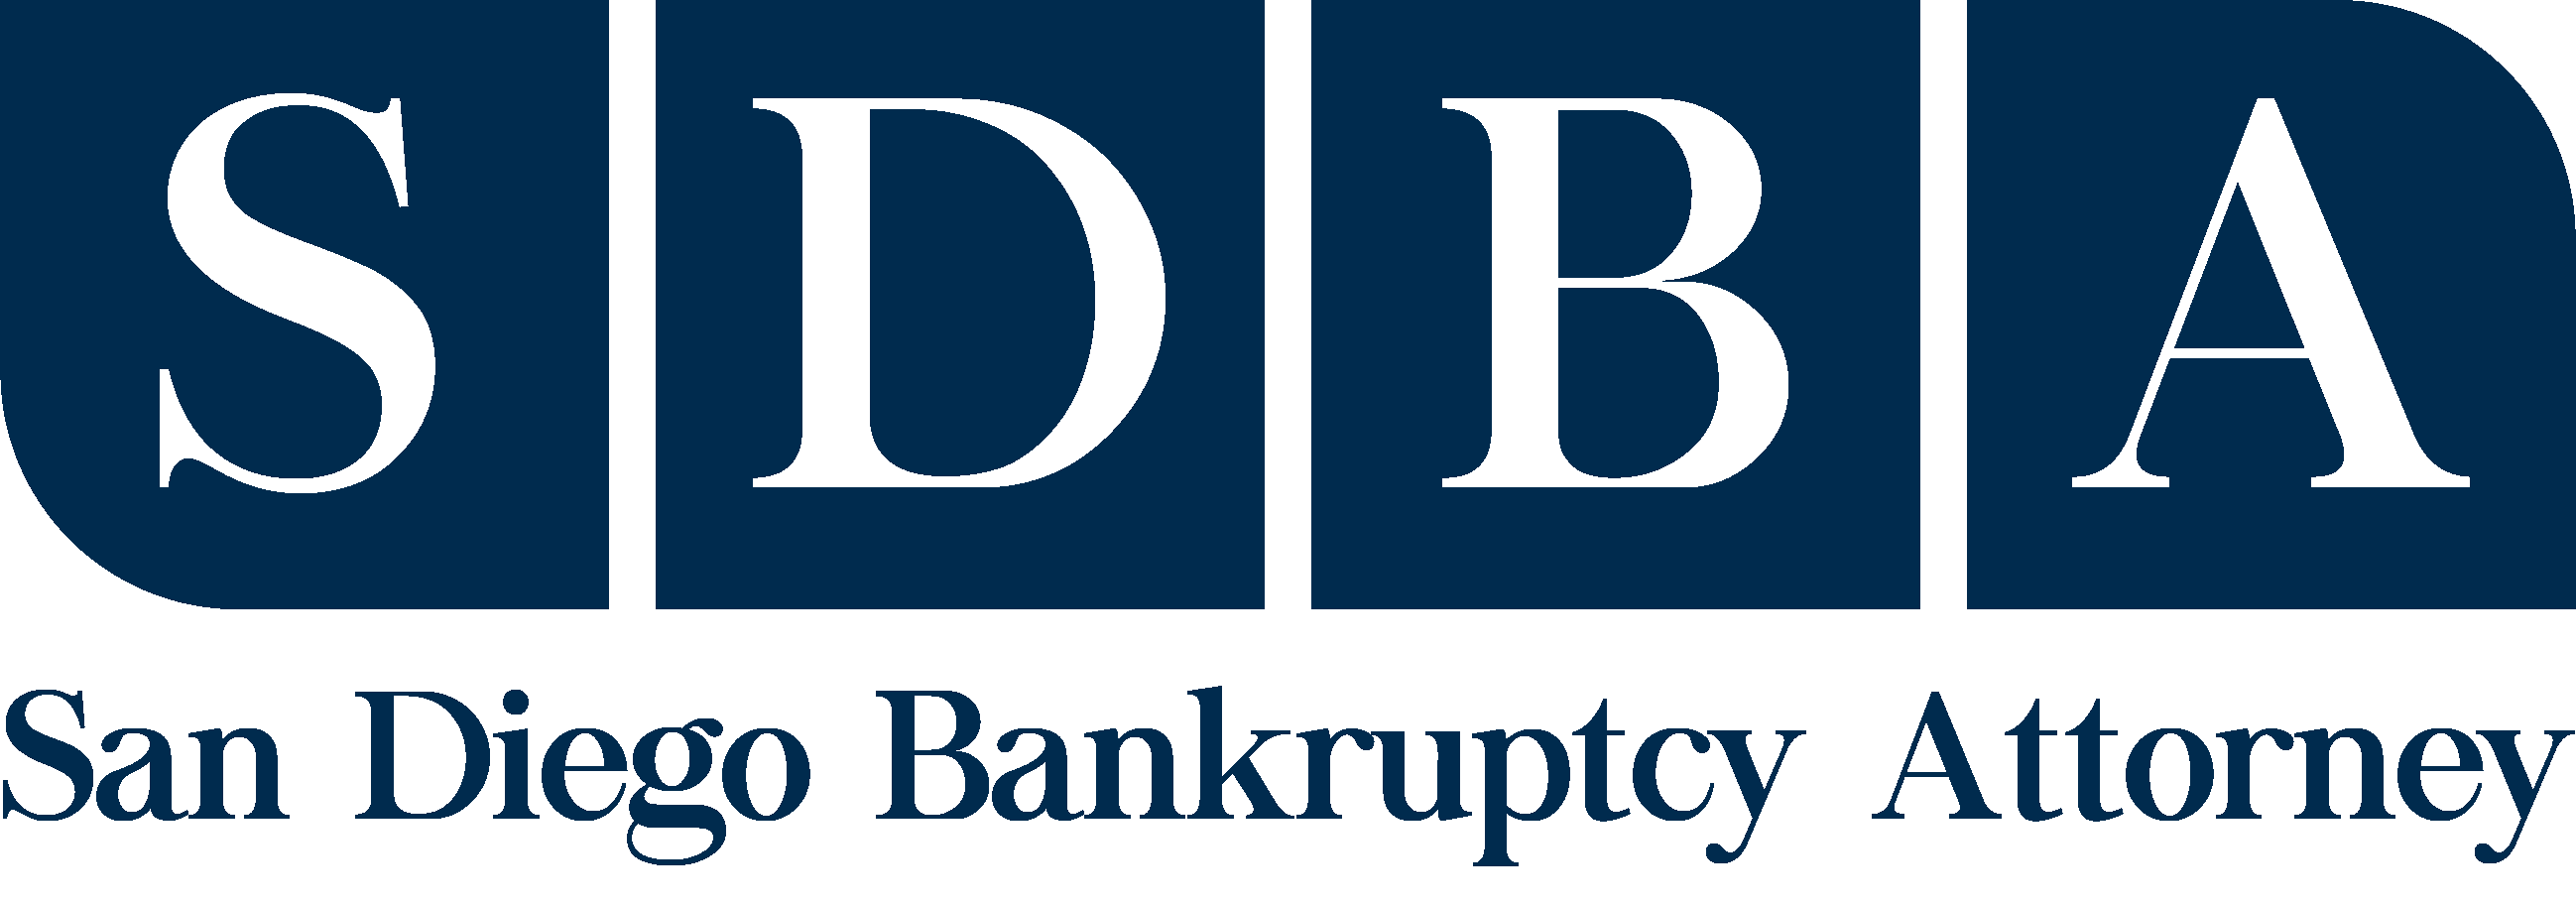 Exemptions in Chapter 7 Bankruptcy 